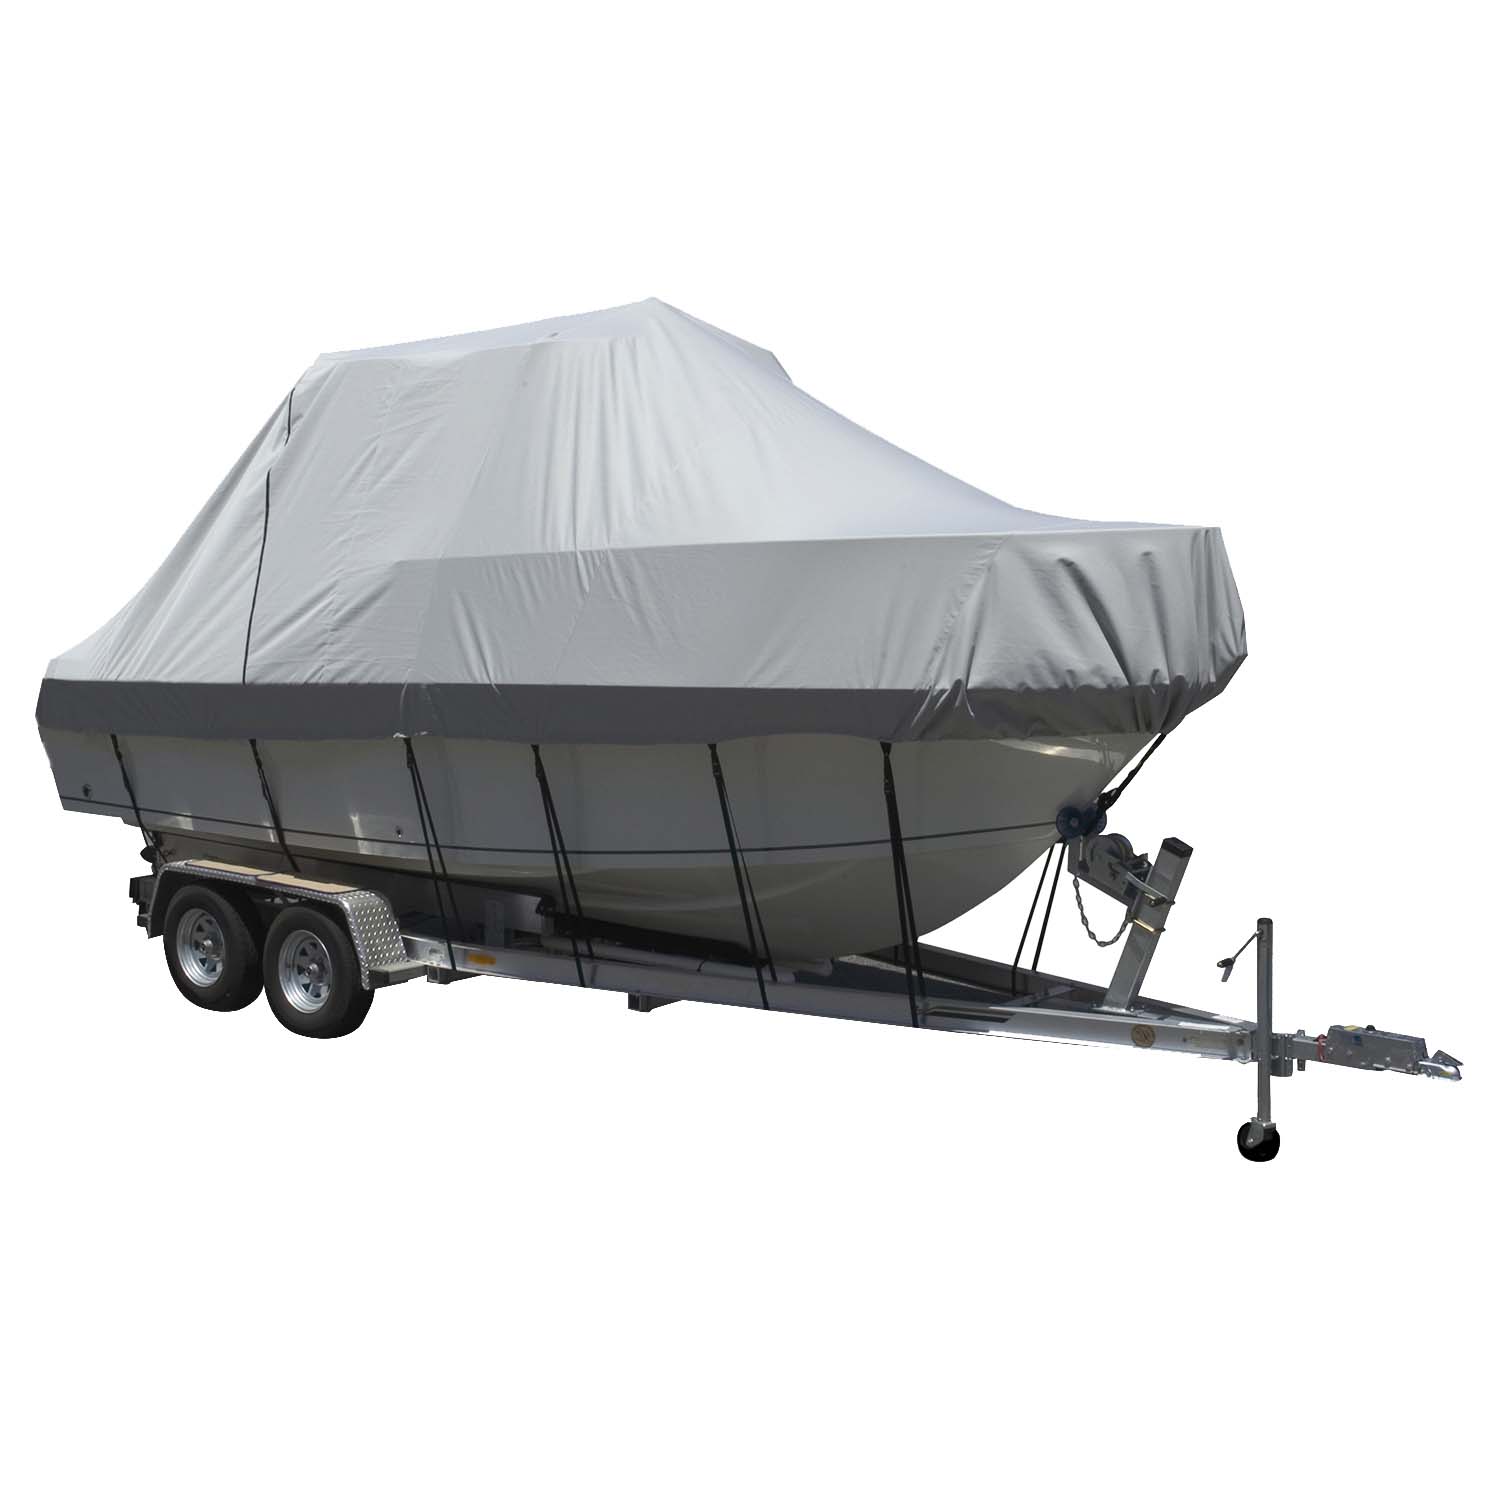 Carver Sun-DURA® Specialty Boat Cover f/21.5' Walk Around Cuddy & Center Console Boats - Grey - 90021S-11 - CW91211 - Avanquil